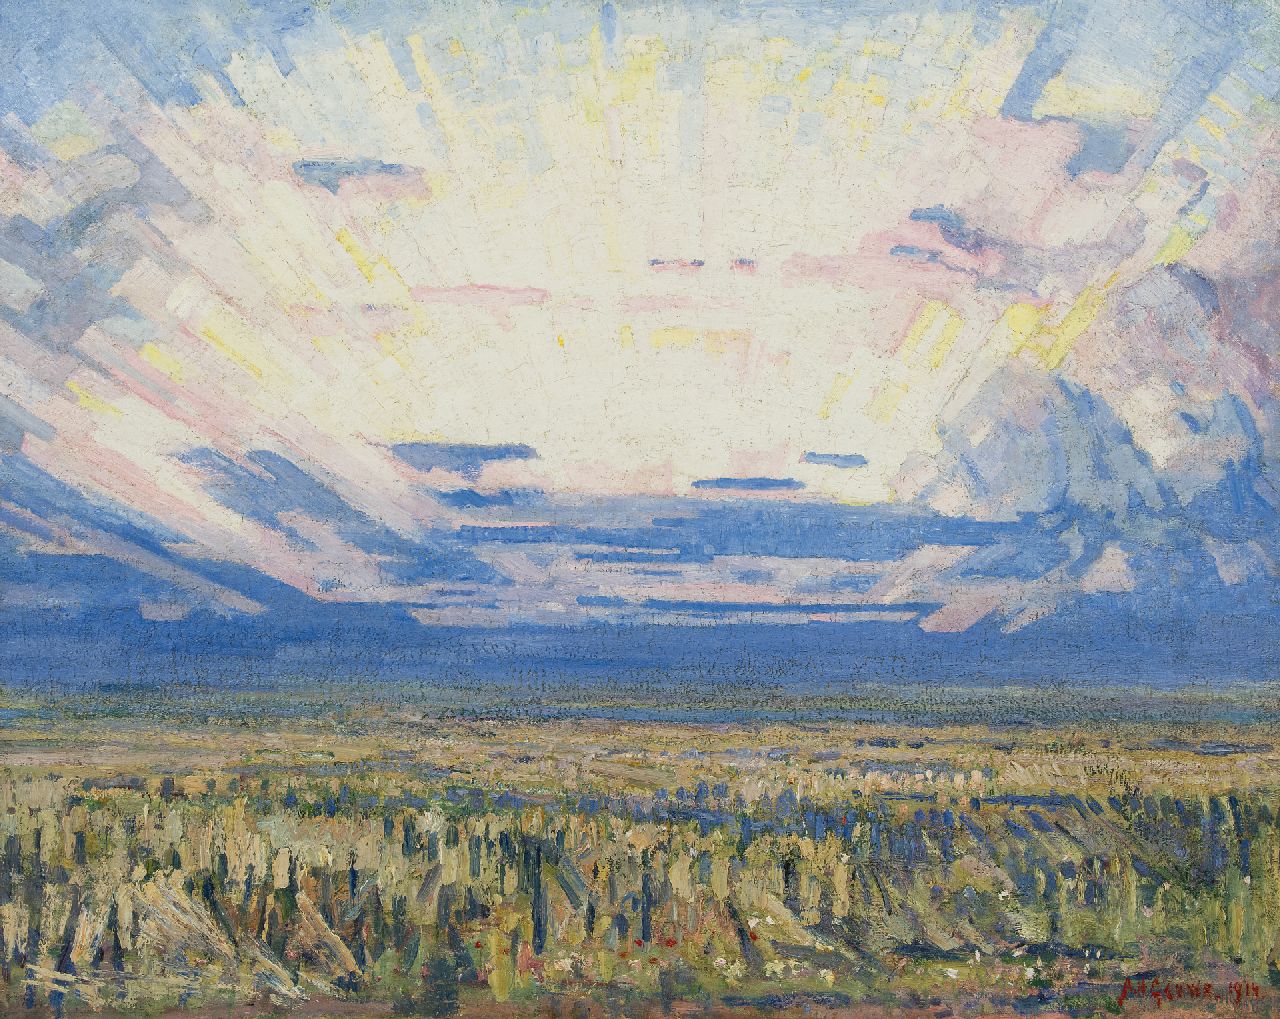 Gouwe A.H.  | Adriaan Herman Gouwe | Paintings offered for sale | Landscape at sunrise, oil on canvas 79.8 x 99.5 cm, signed l.r. and dated 1914